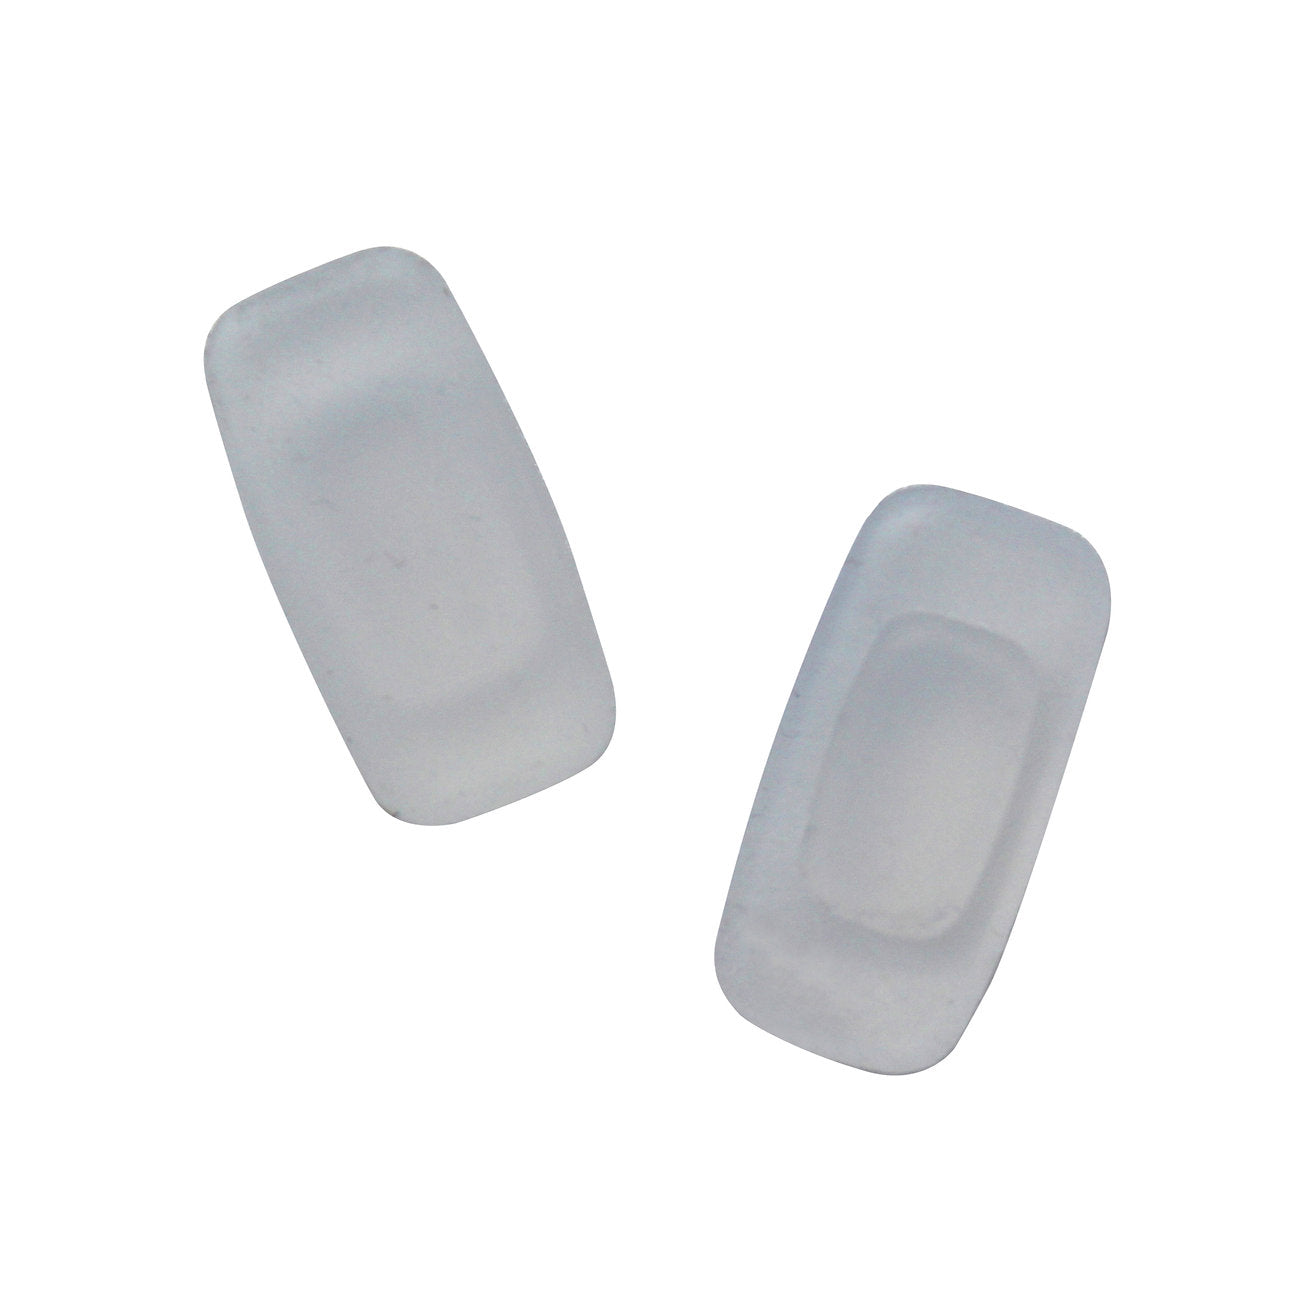 System 3 silicone nose pads